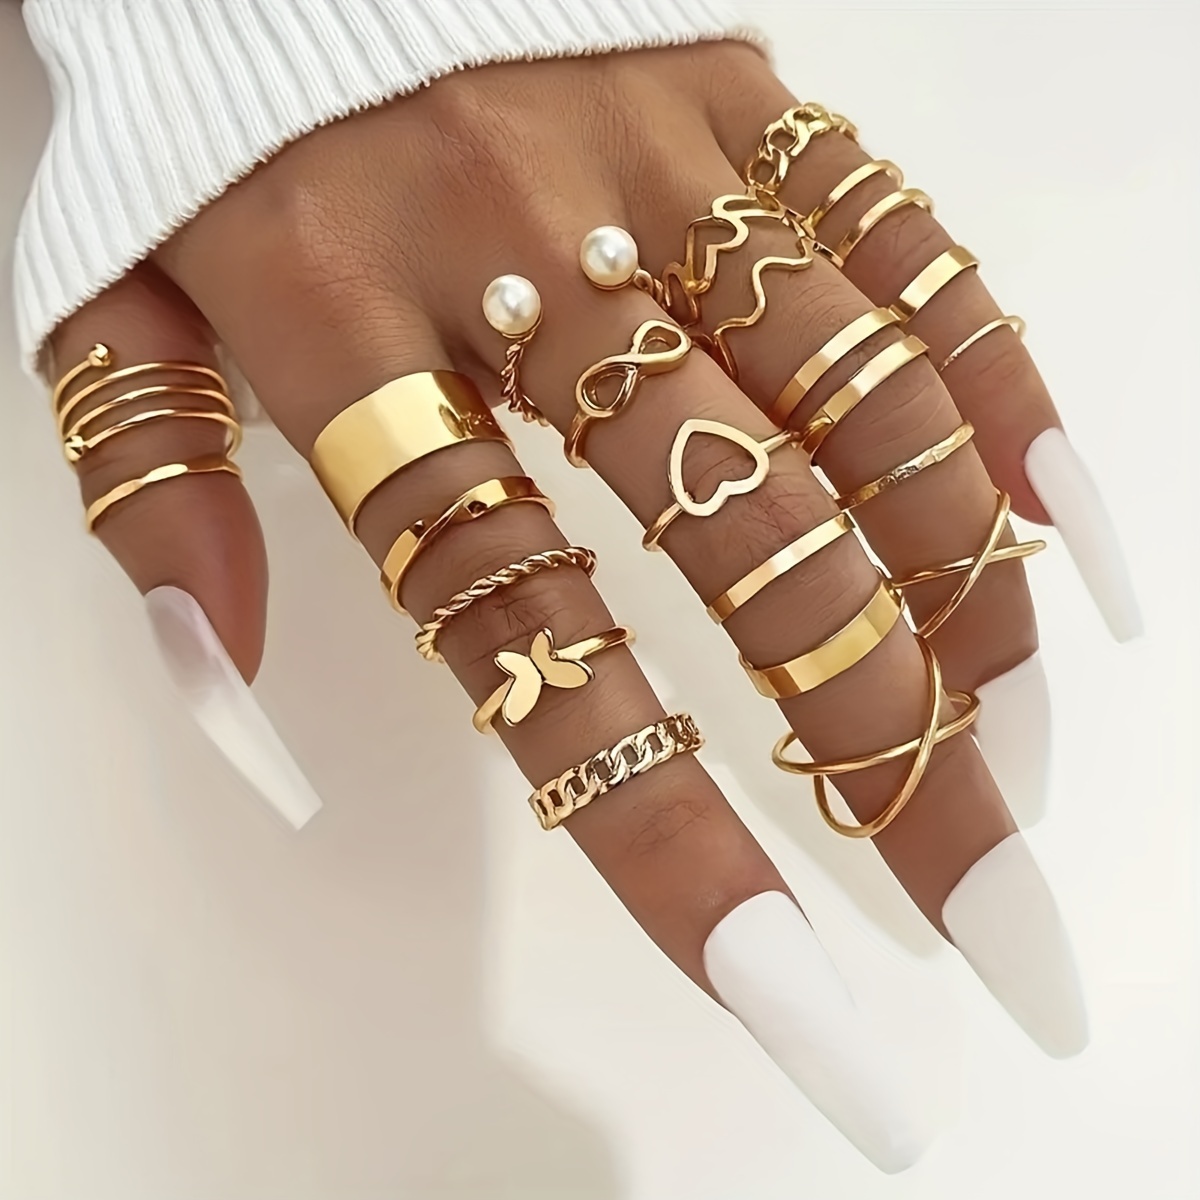 

22 Pcs Knuckle Rings Set For Women Girls, Stackable Rings Boho Joint Finger Midi Rings Silver Hollow Carved Crystal Stacking Rings Pack For Gift